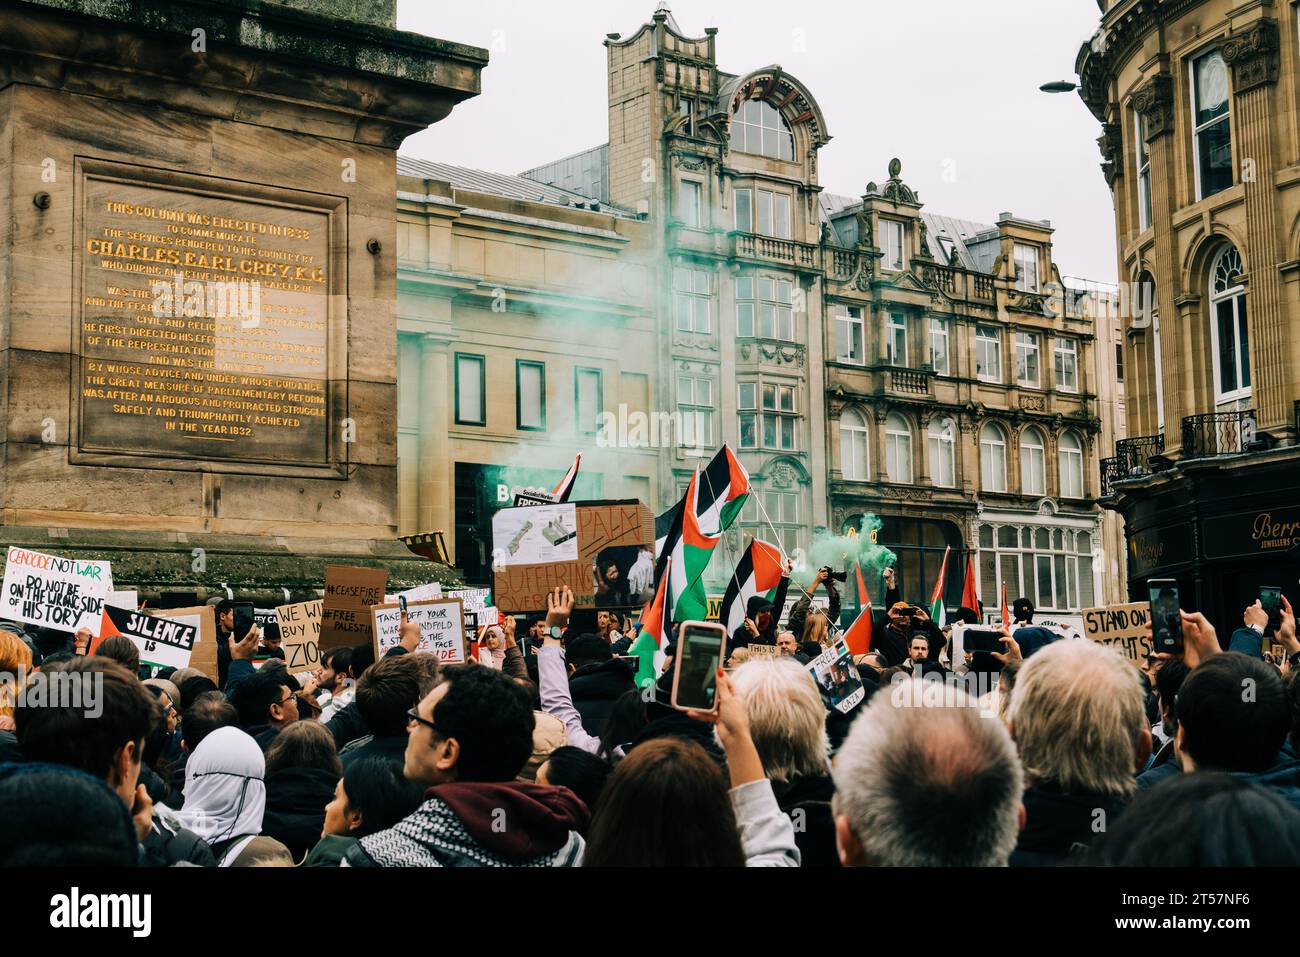 Crowd wave Palestine flags, green smoke bombs and handmade protest signs at Grey's Monument. Newcastle Upon Tyne, England, UK - Oct 28 2023. Stock Photo